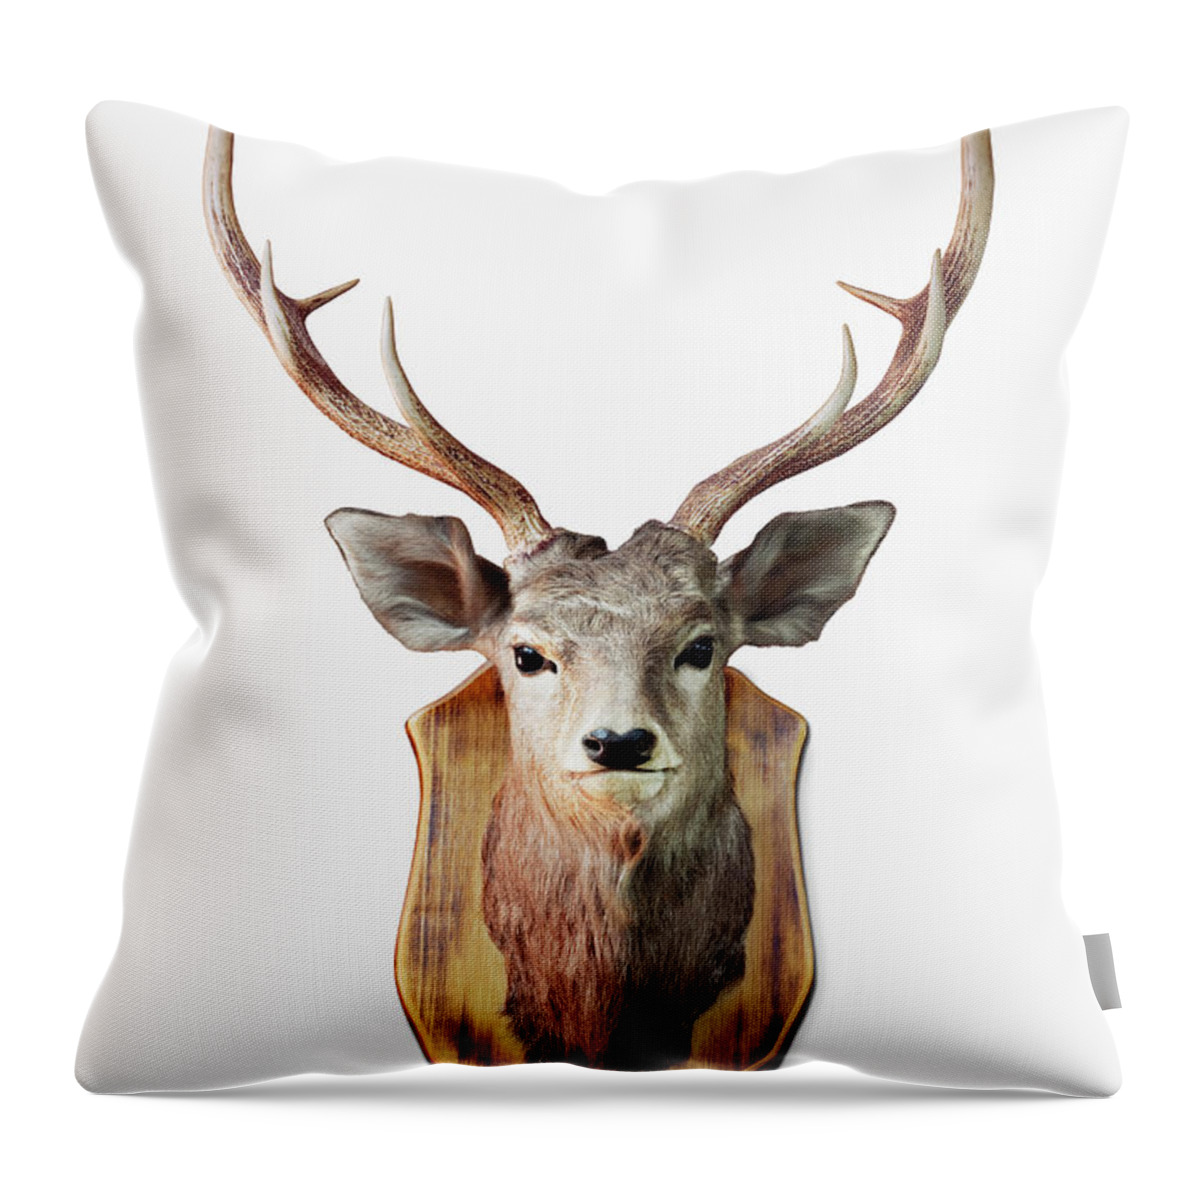 Hokkaido Throw Pillow featuring the photograph Deer Trophy by H&c Studio